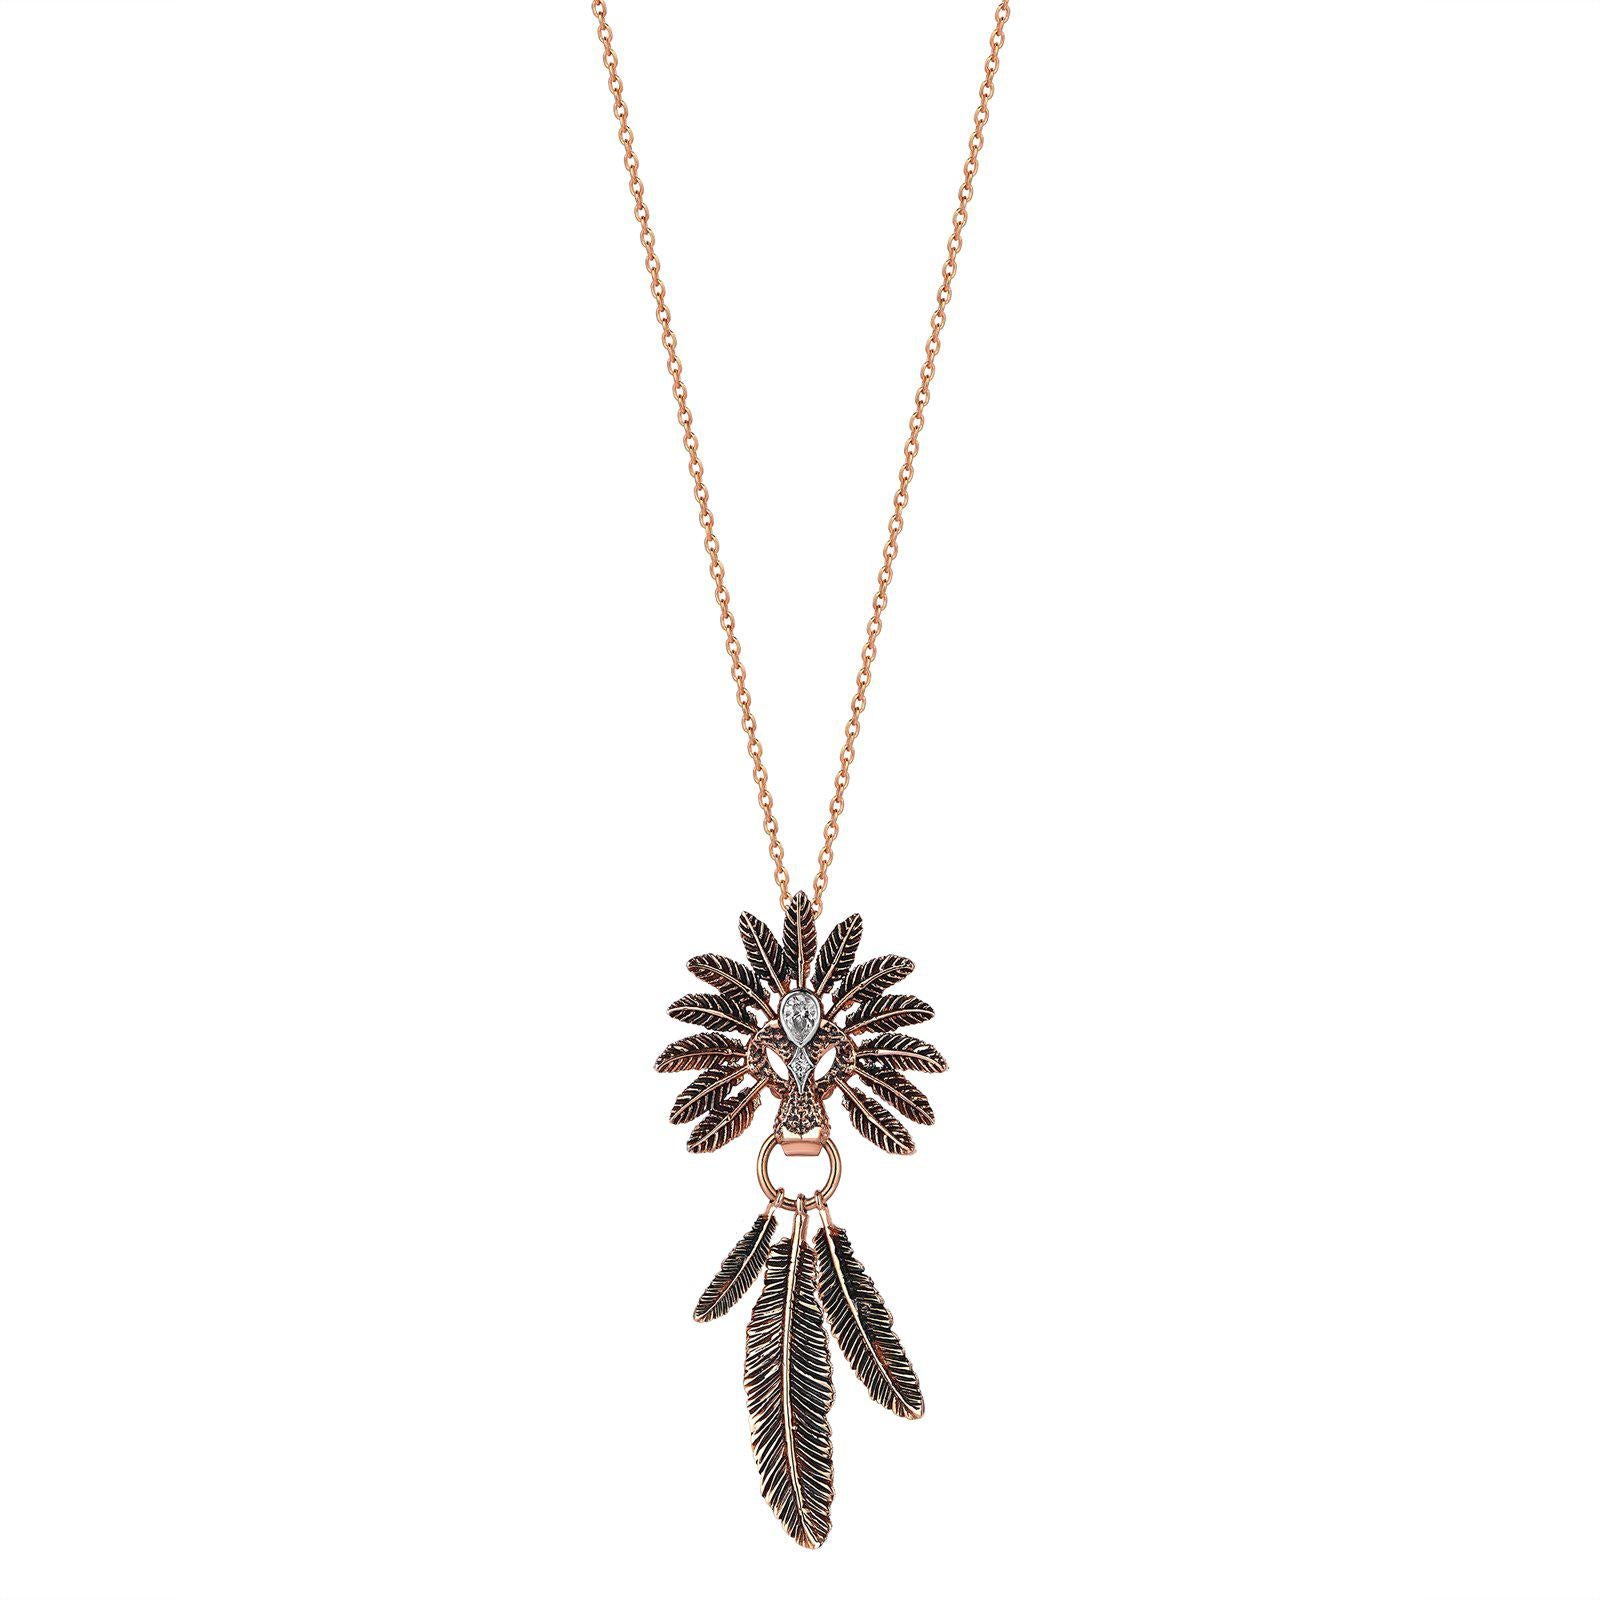 Bronze Feather Necklace with Swarovski Crystals in Blue Green